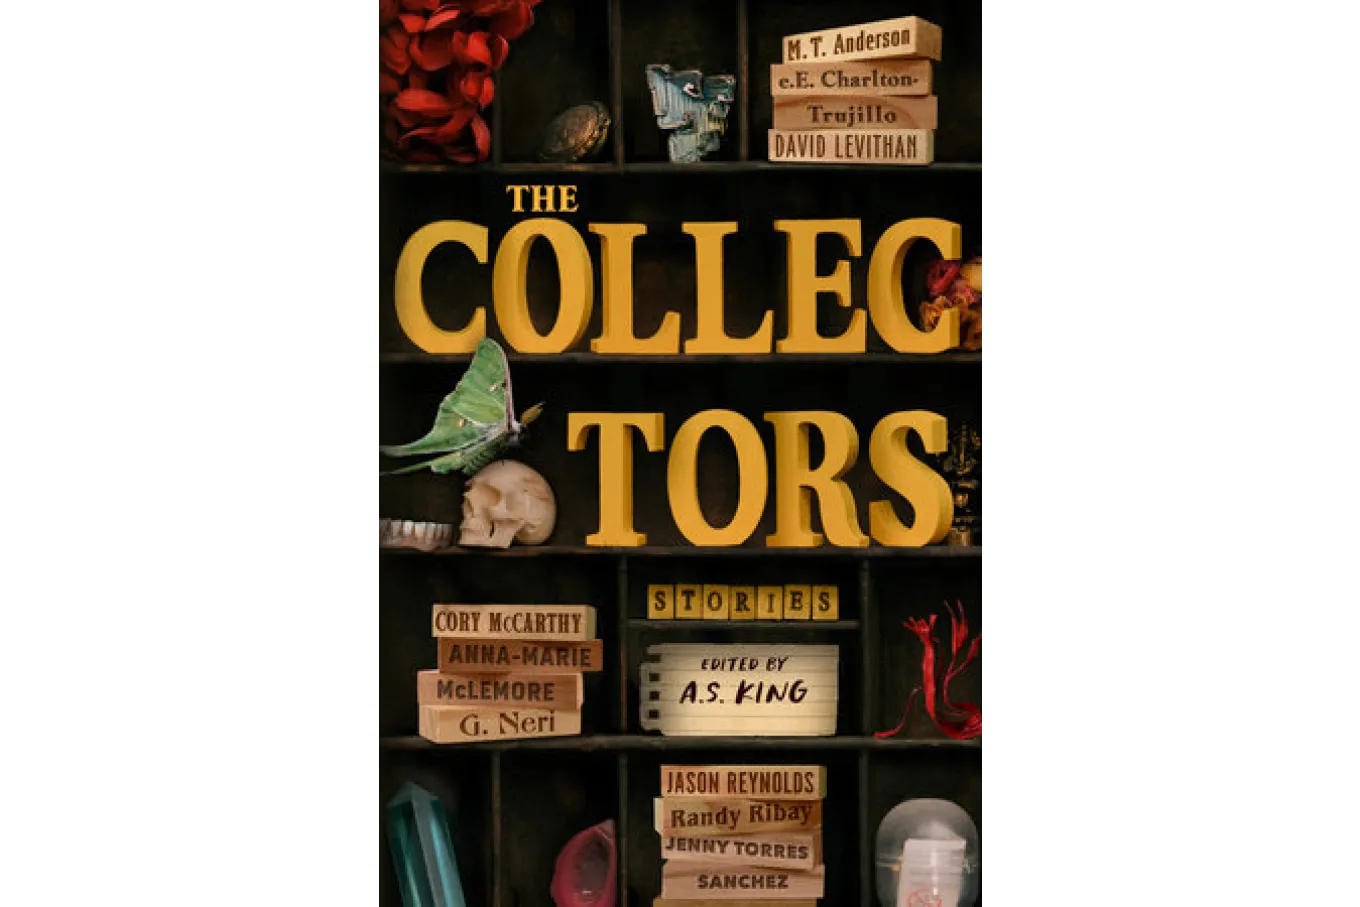 Cover of the Collectors